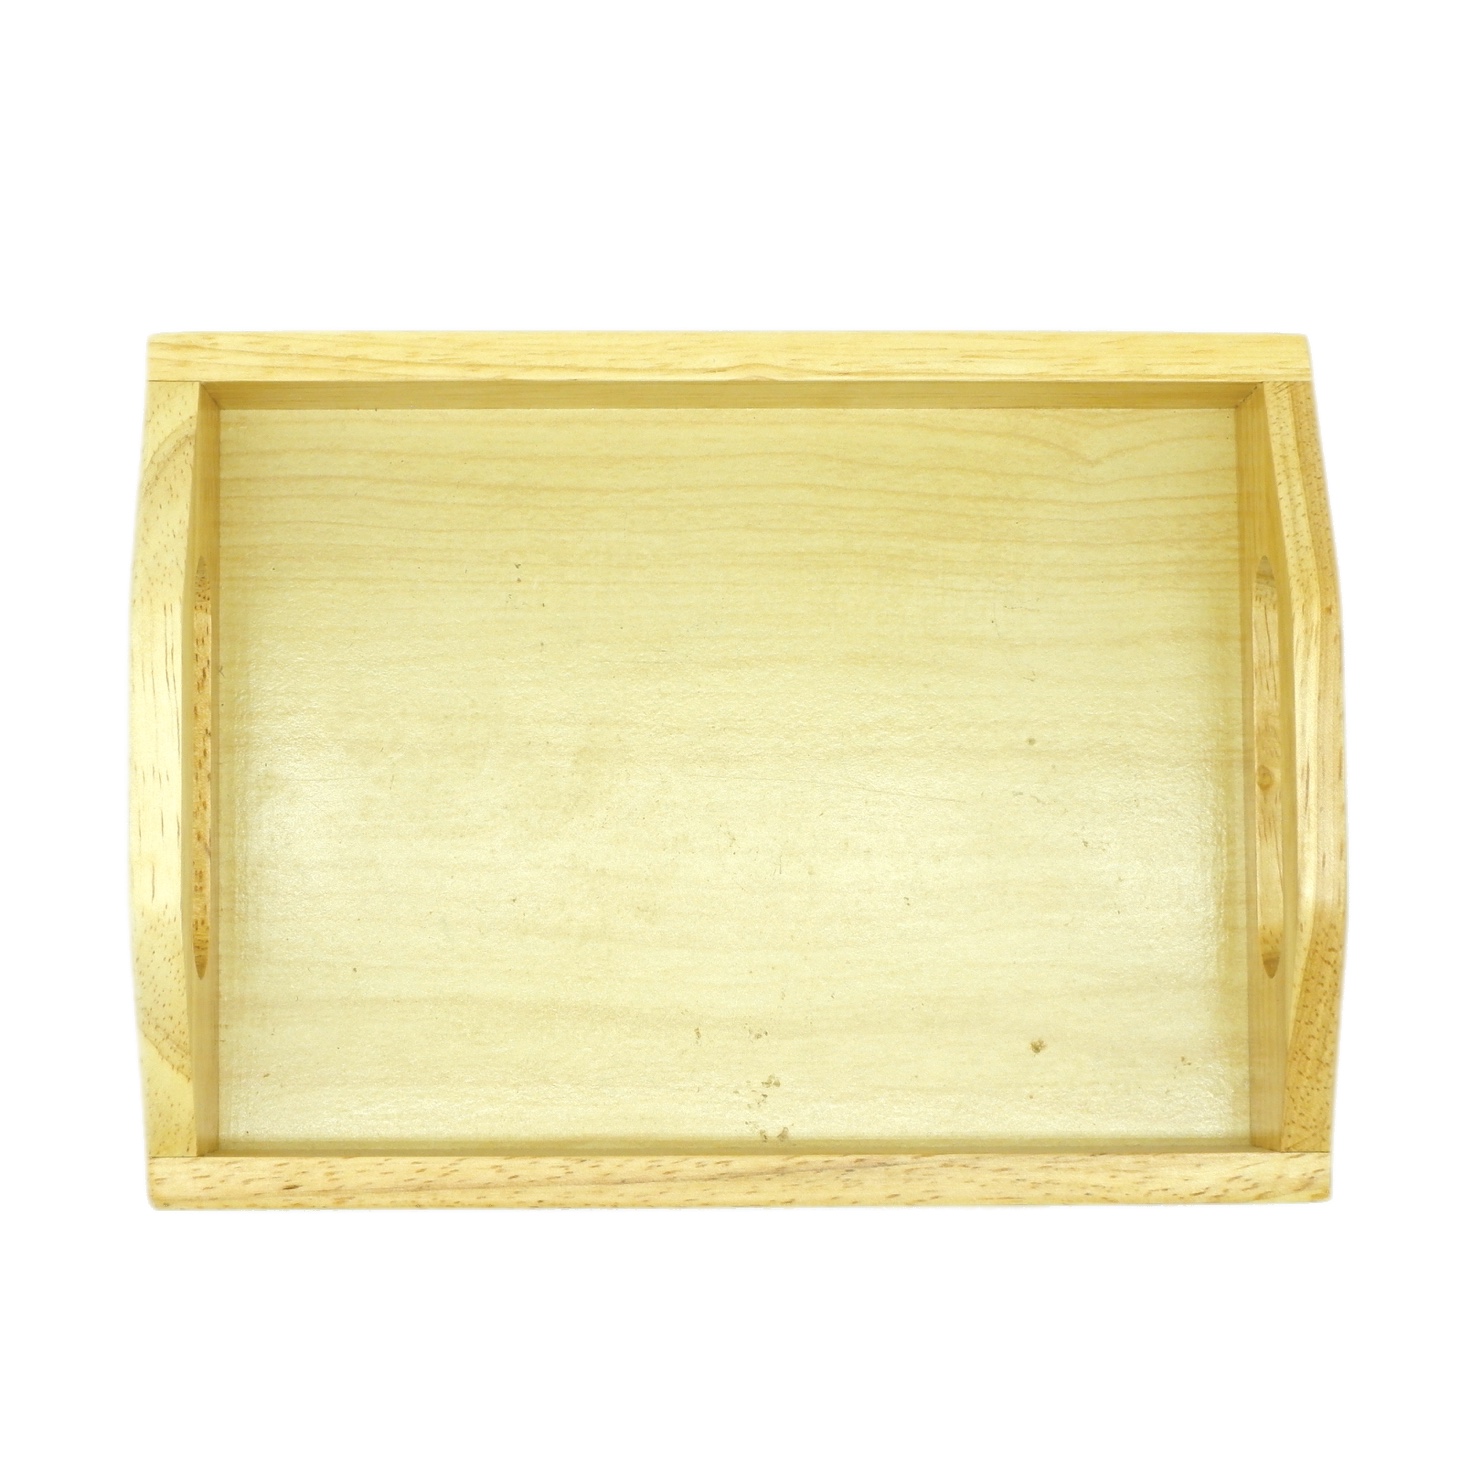 Wooden Tray: Small